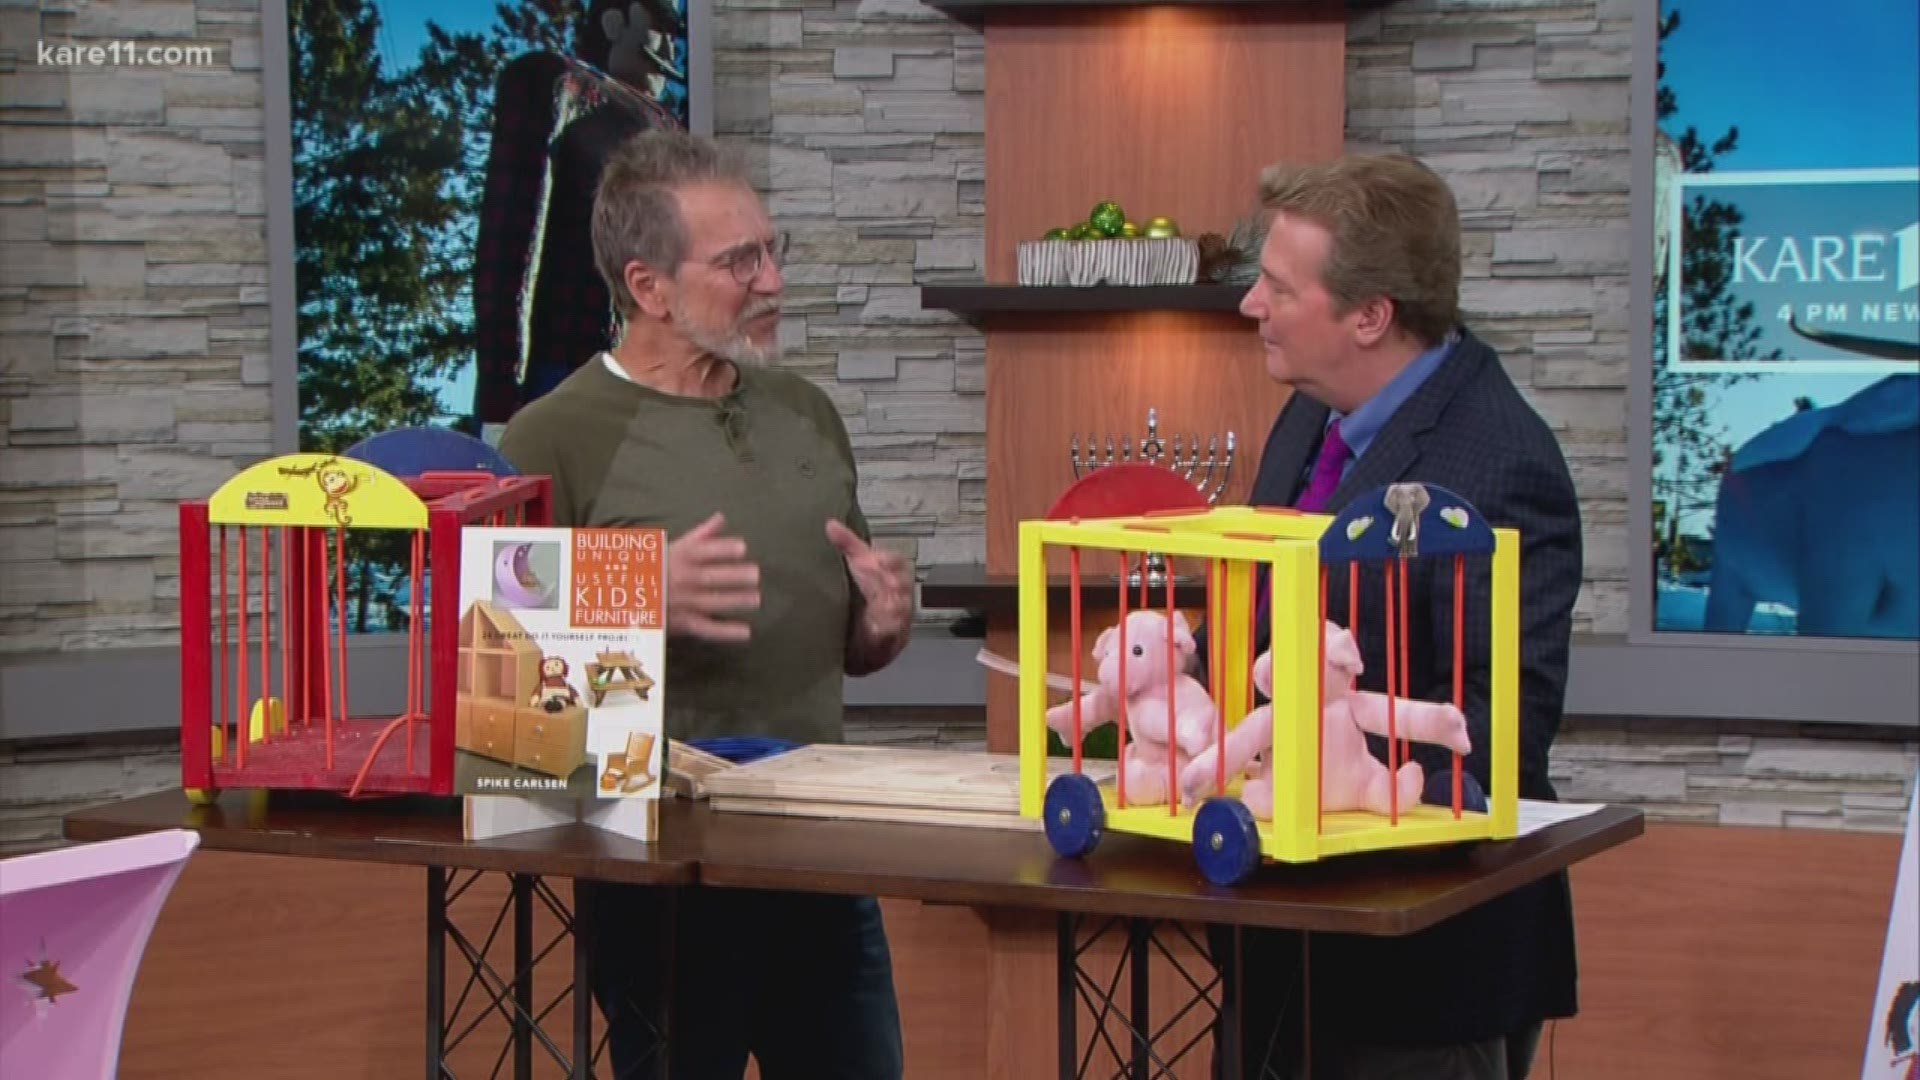 As you're thinking about holiday gifts for the kids in your family... how about giving something a little more personal and hand-made? Woodworker and author, Spike Carlsen, share some of the ideas featured in his new book, coming out this week.